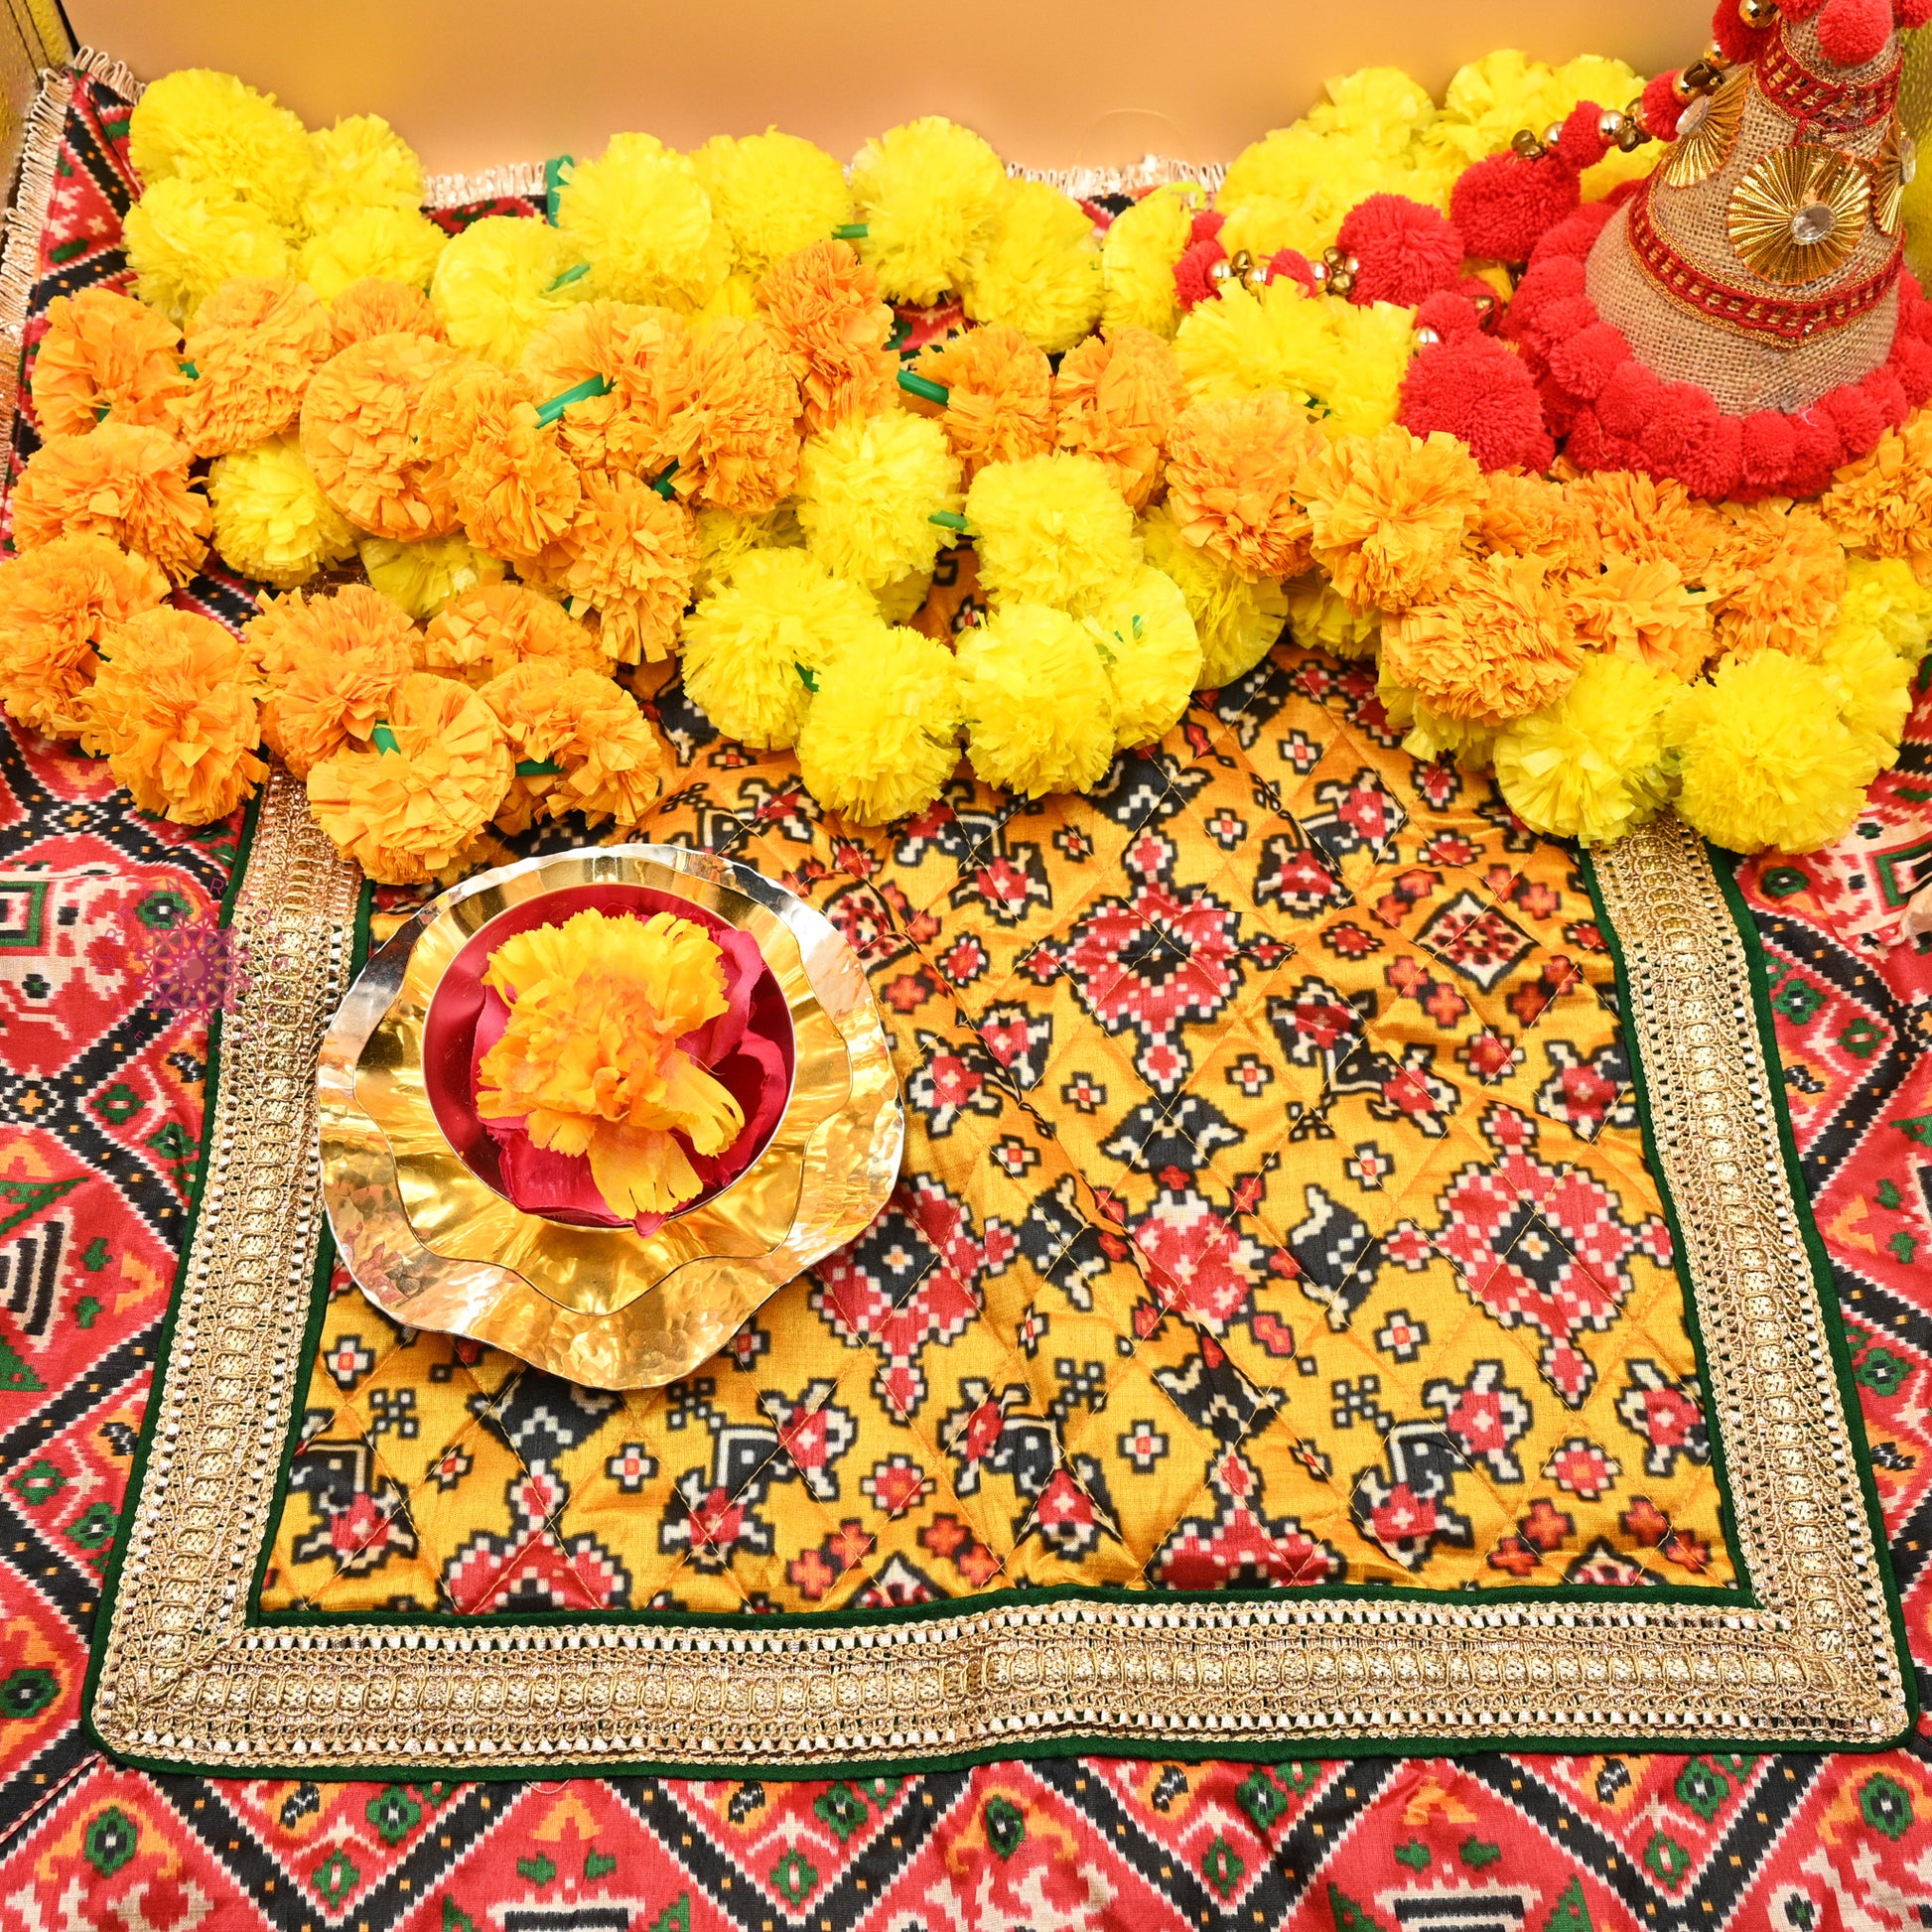 Puja Aasan With Thaal Cover - Urban Roots